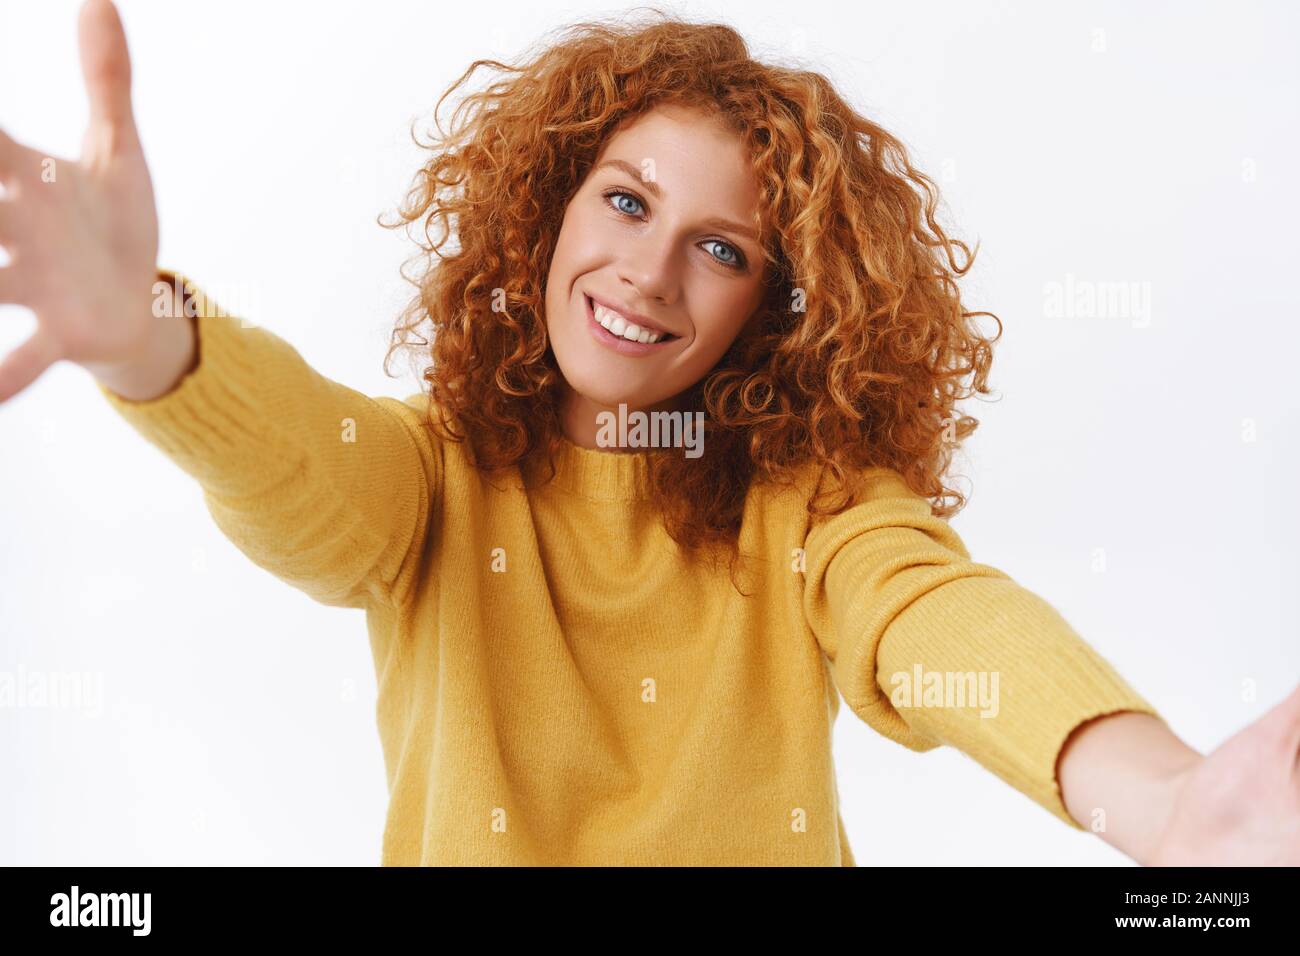 Close-up portrait, friendly and lovely, smiling happy curly redhead woman in yellow sweater, tilt head silly grinning, spread arms to hug friend tight Stock Photo